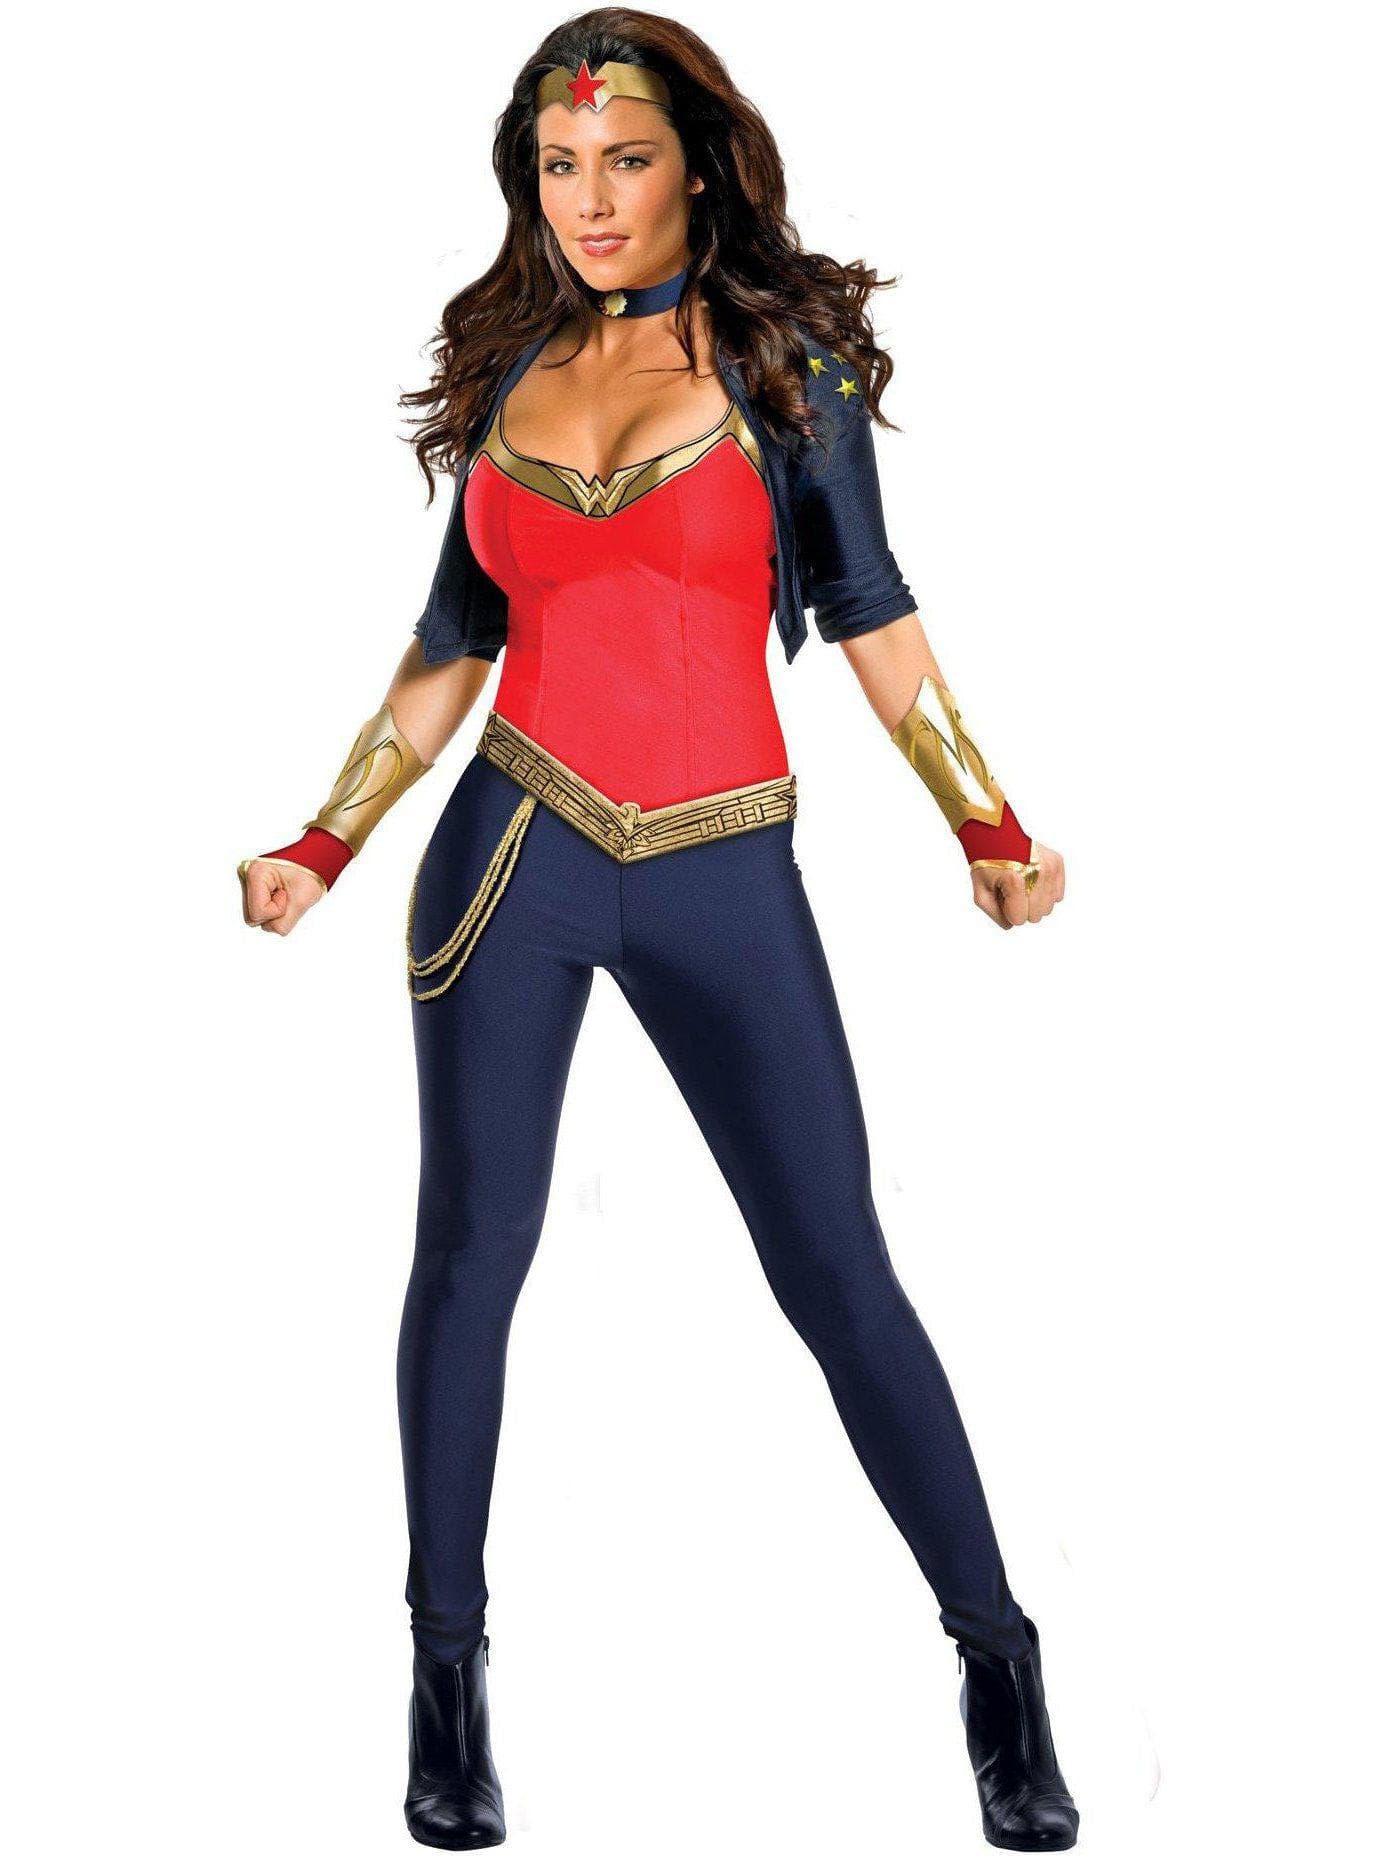 Adult Justice League Wonder Woman Deluxe Costume - costumes.com